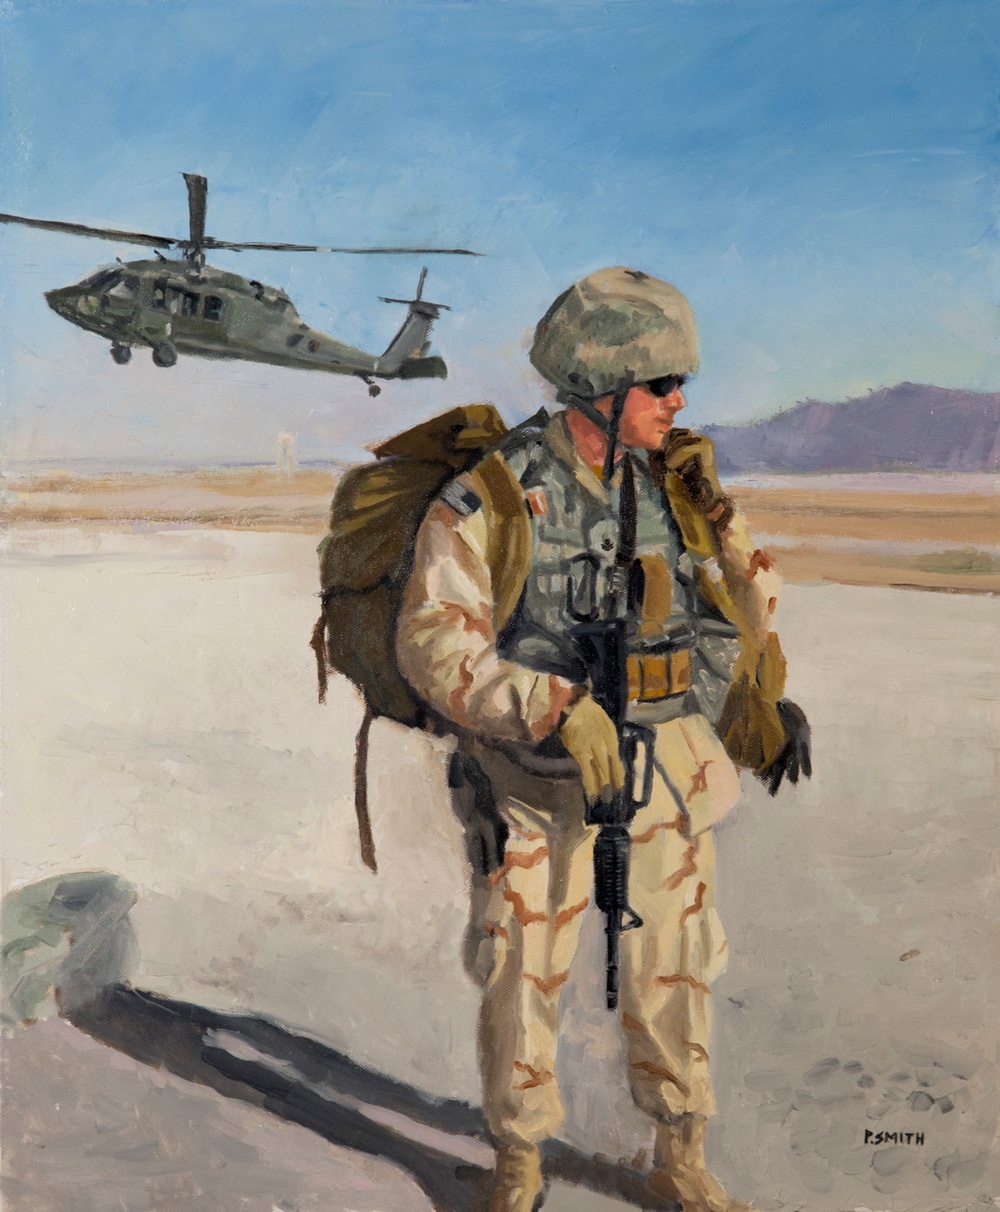 US Coast Guard Art Program 2015 Collection, 'Waiting for a Ride'